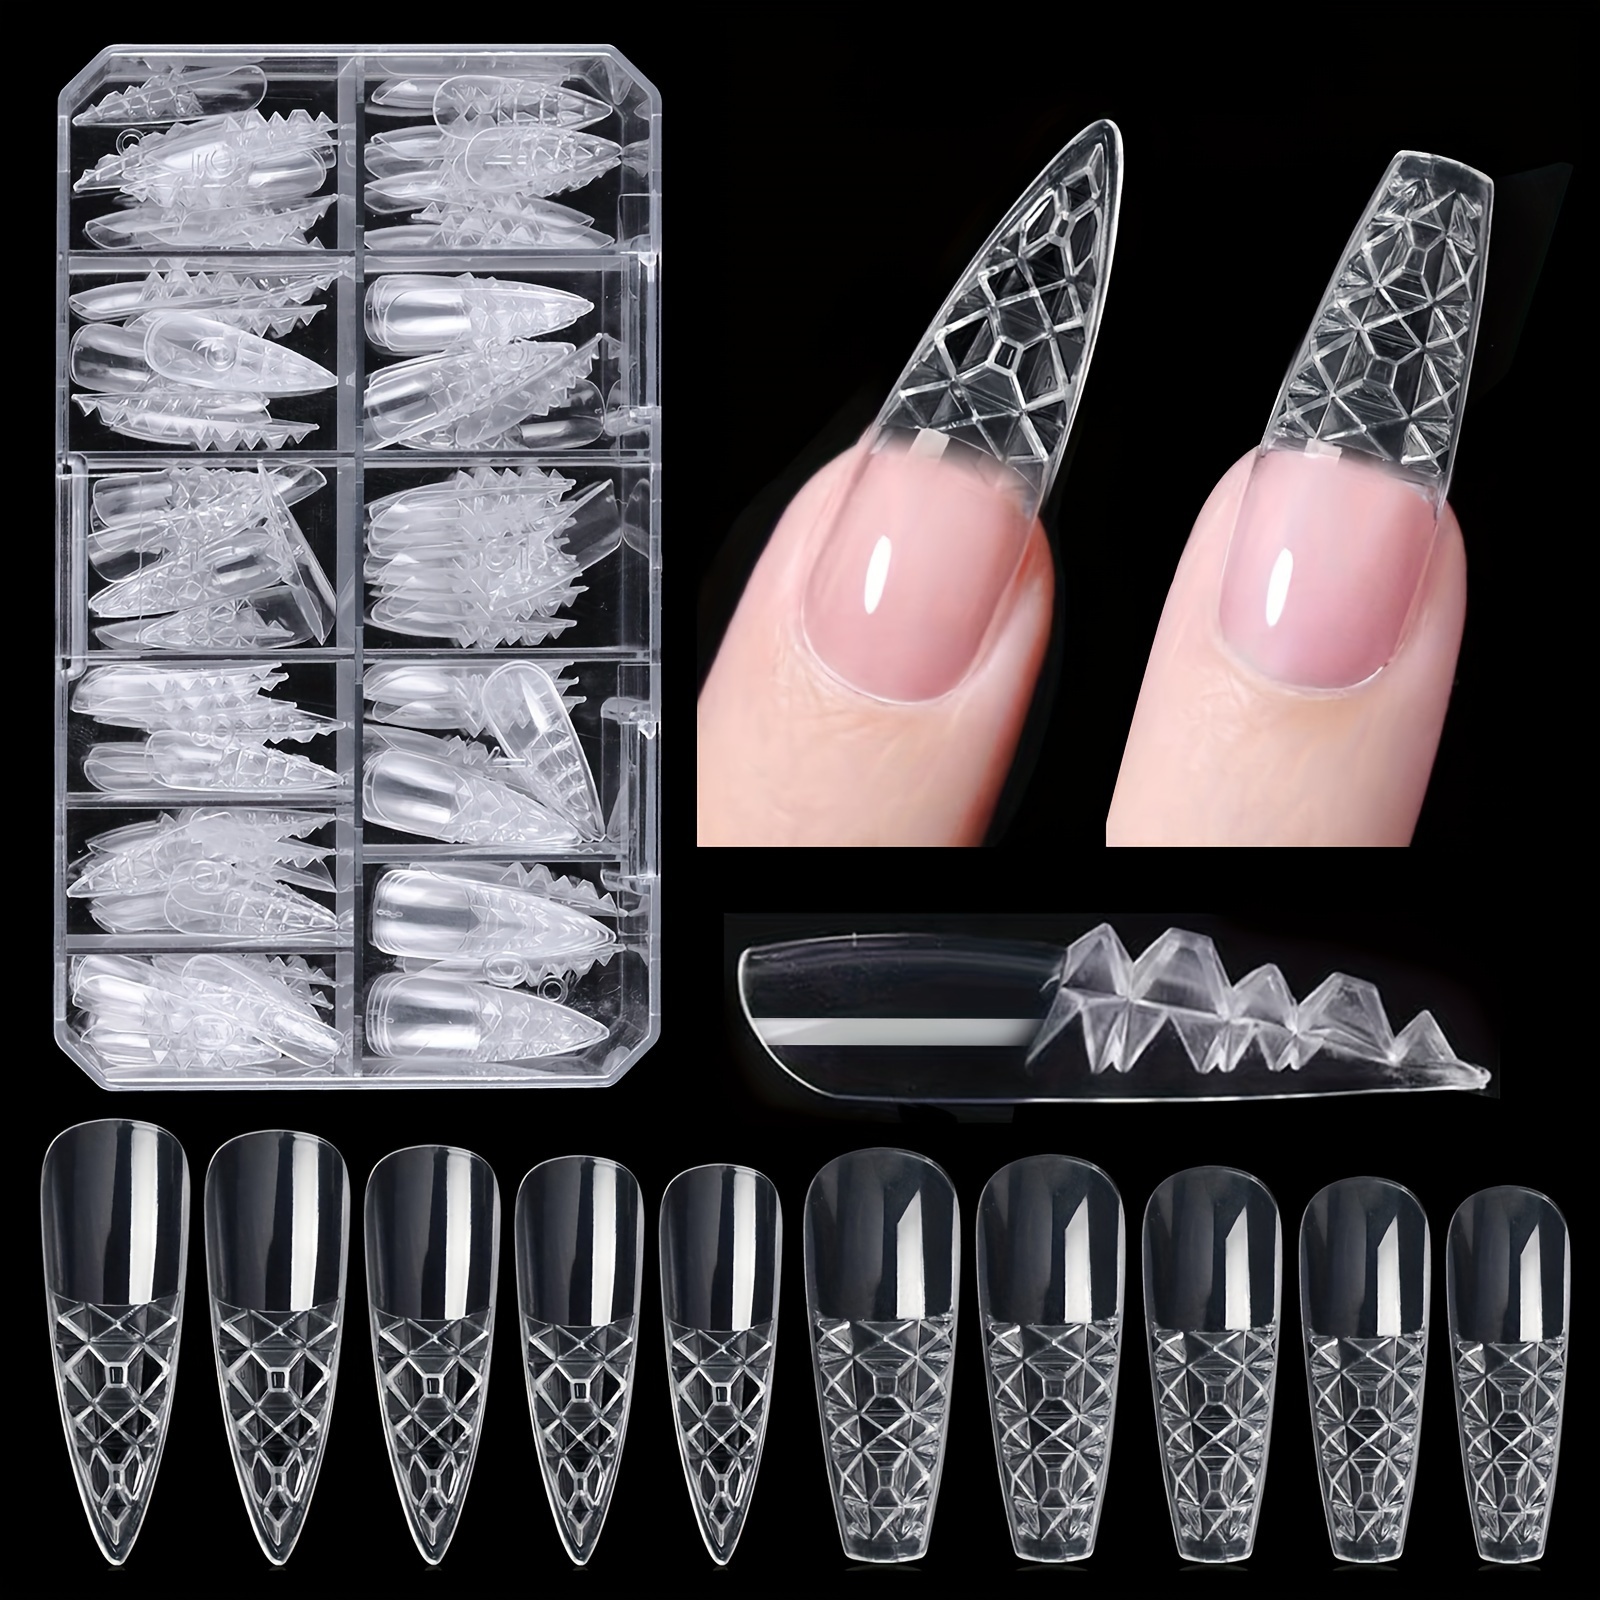 

120pc/box Fake Nails Nail Art Extension False Nail Tips Stencil Fast Building Tools Acrylic Gel Crystal Extend Mode Clear Nail Tips-stiletto Coffin